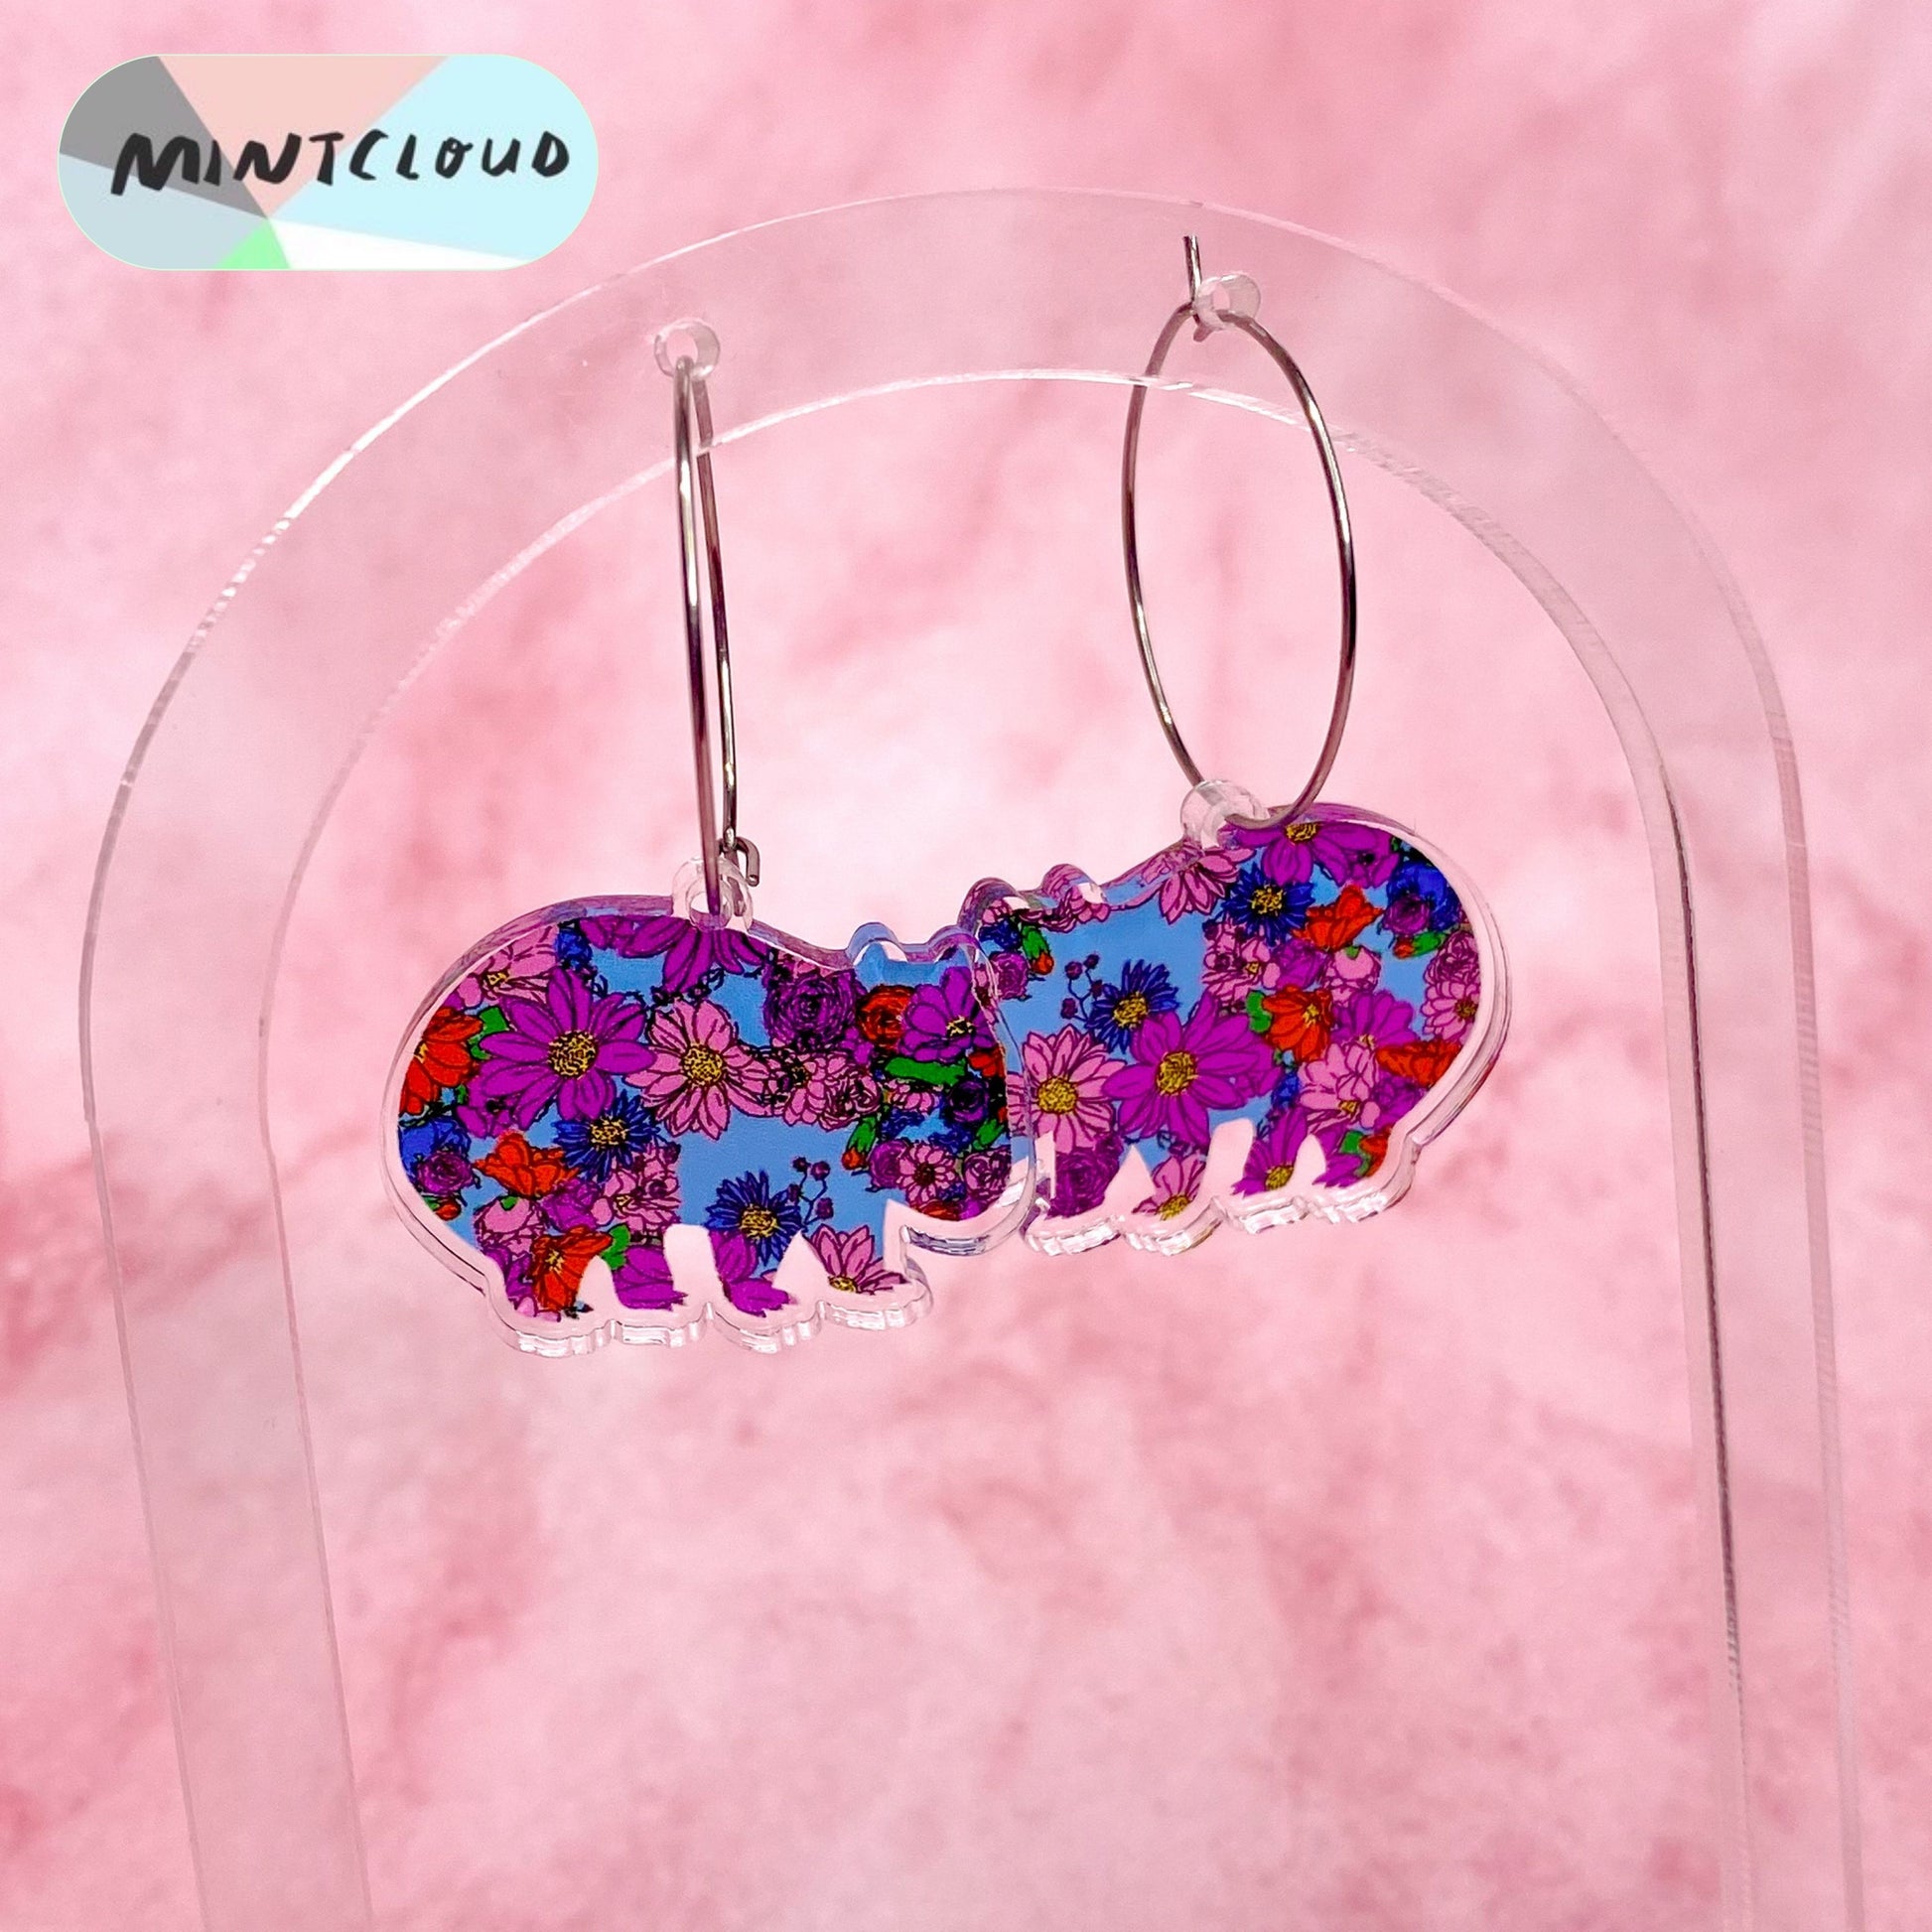 Floral Printed Aussie Animals Dangles - Various Designs From Mintcloud Studio, an online jewellery store based in Adelaide South Australia